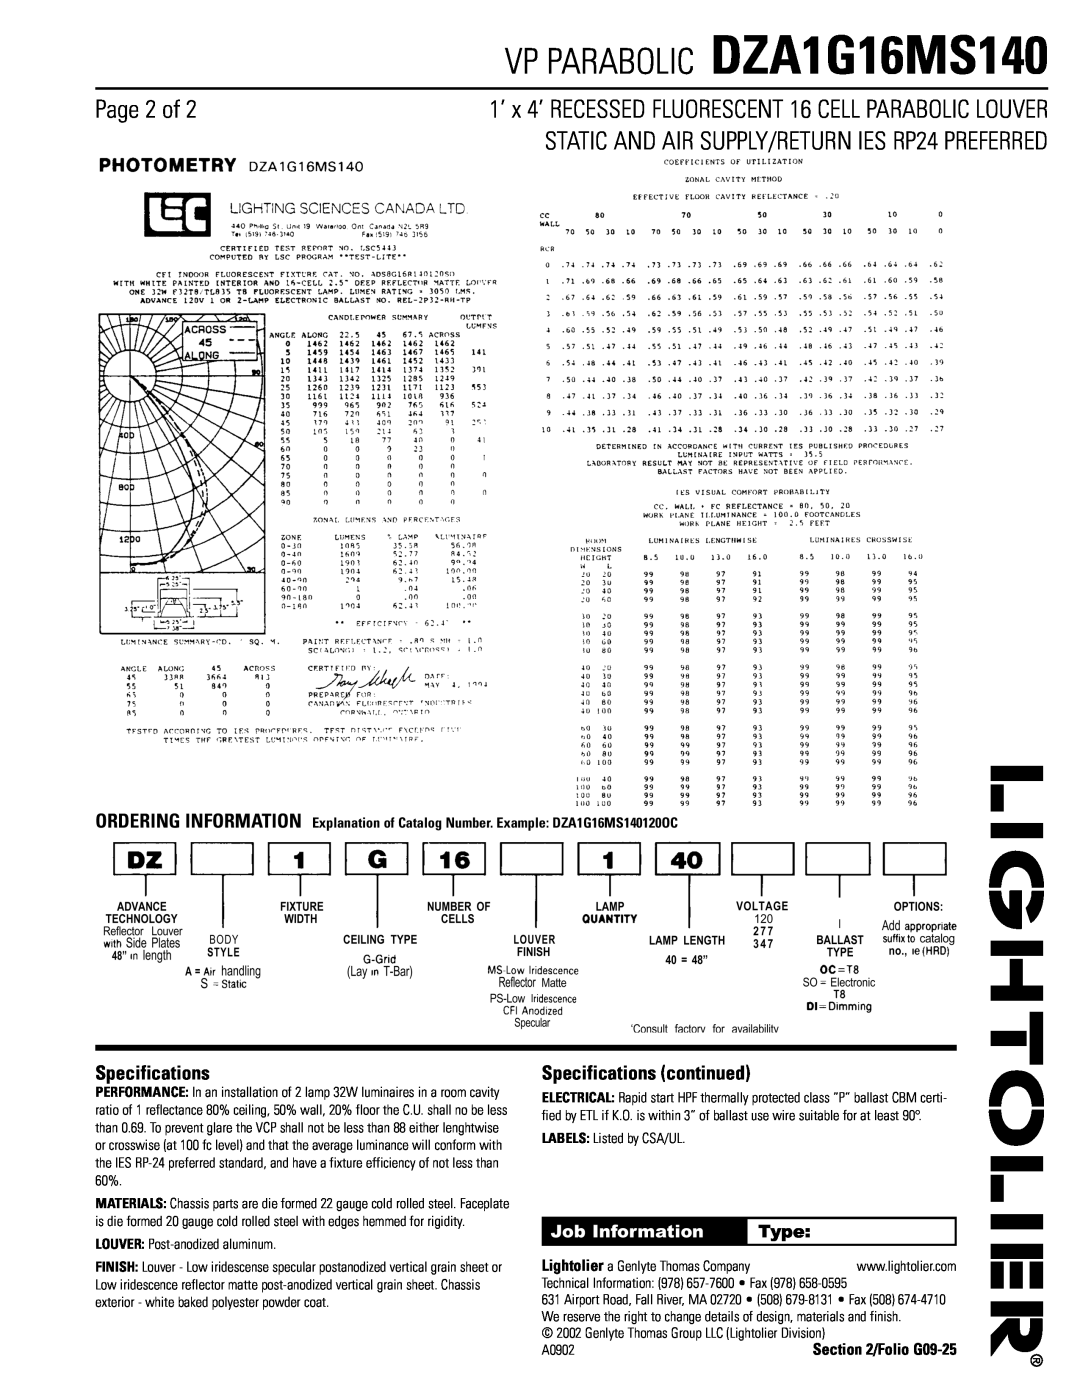 Lightolier manual Page 2 of, Specifications continued, VP PARABOLIC DZA1G16MS140, Job Information, Type 